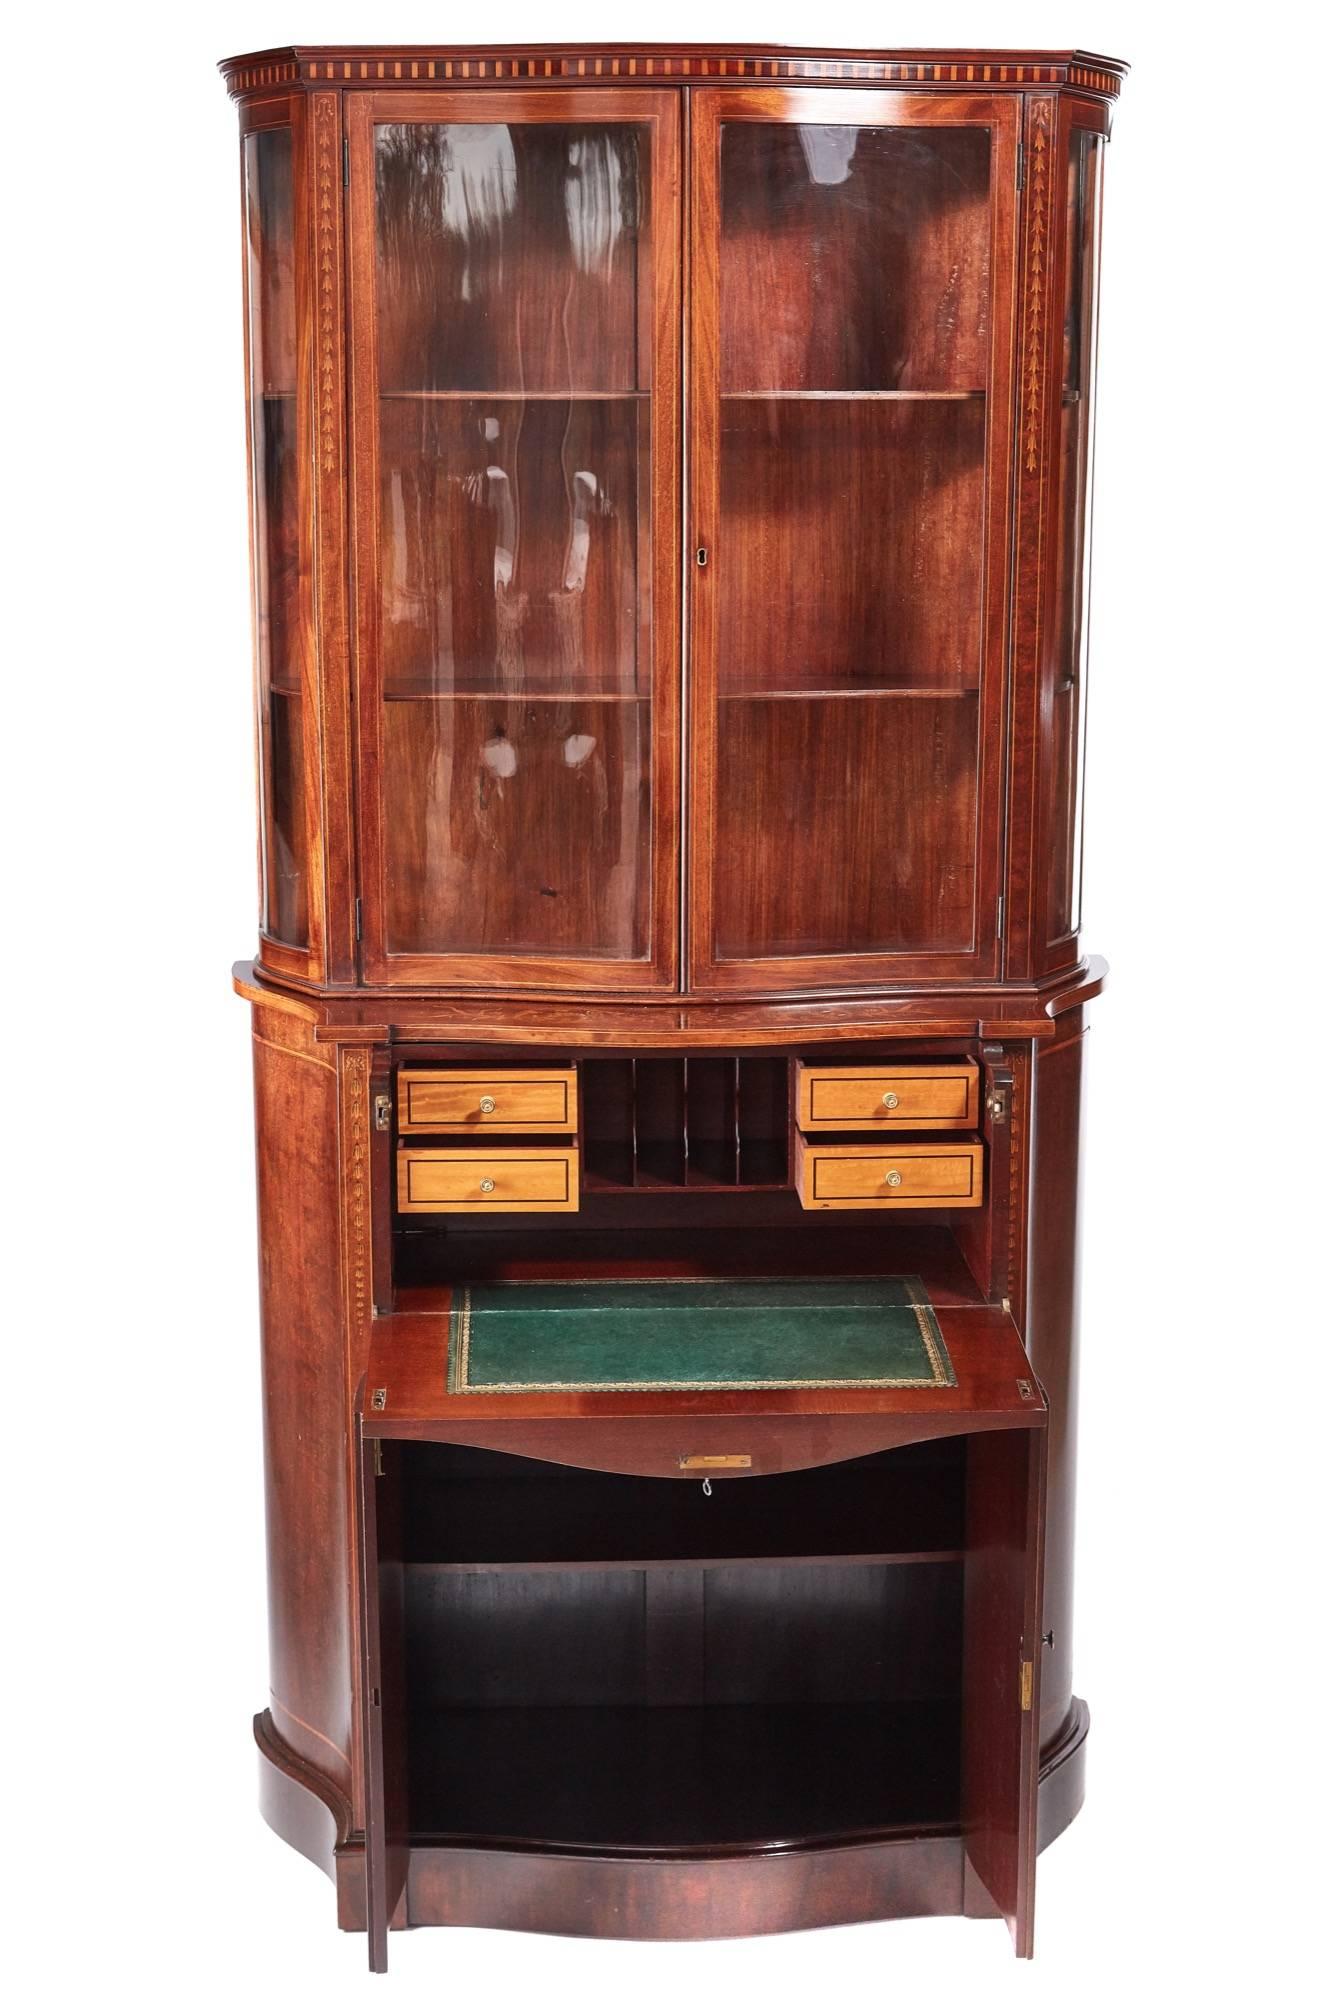 Fine quality antique mahogany inlaid serpentine shaped secretaire bookcase or cabinet, the upper section with a shaped inlaid cornice, lovely serpentine shaped glazed doors and sides, opening to reveal two adjustable shelves, the base having a fine